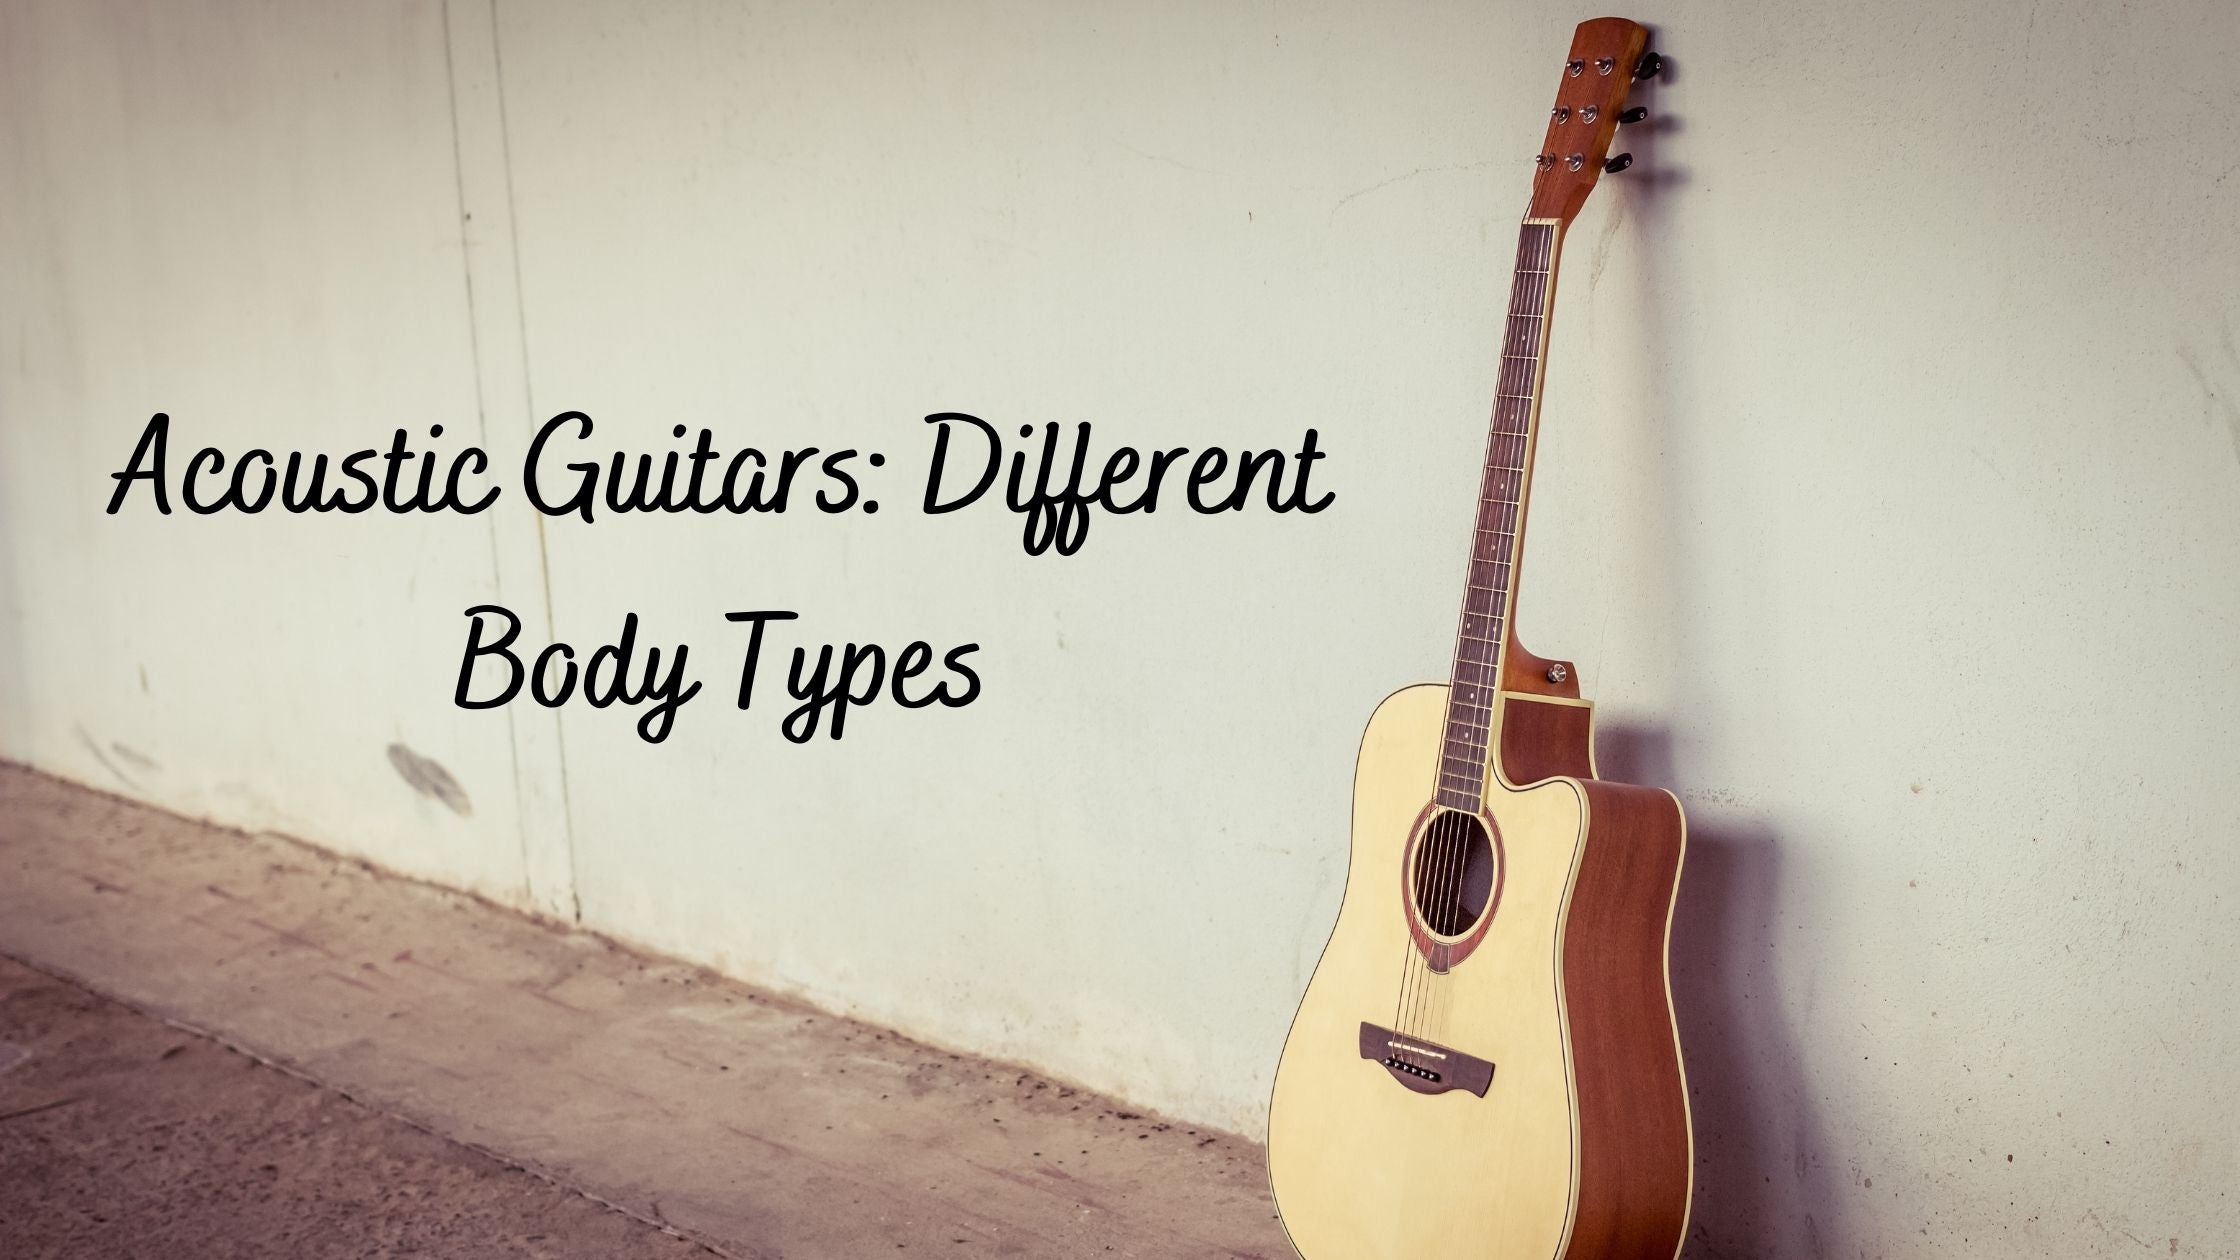 Acoustic Guitars: Different Body Types